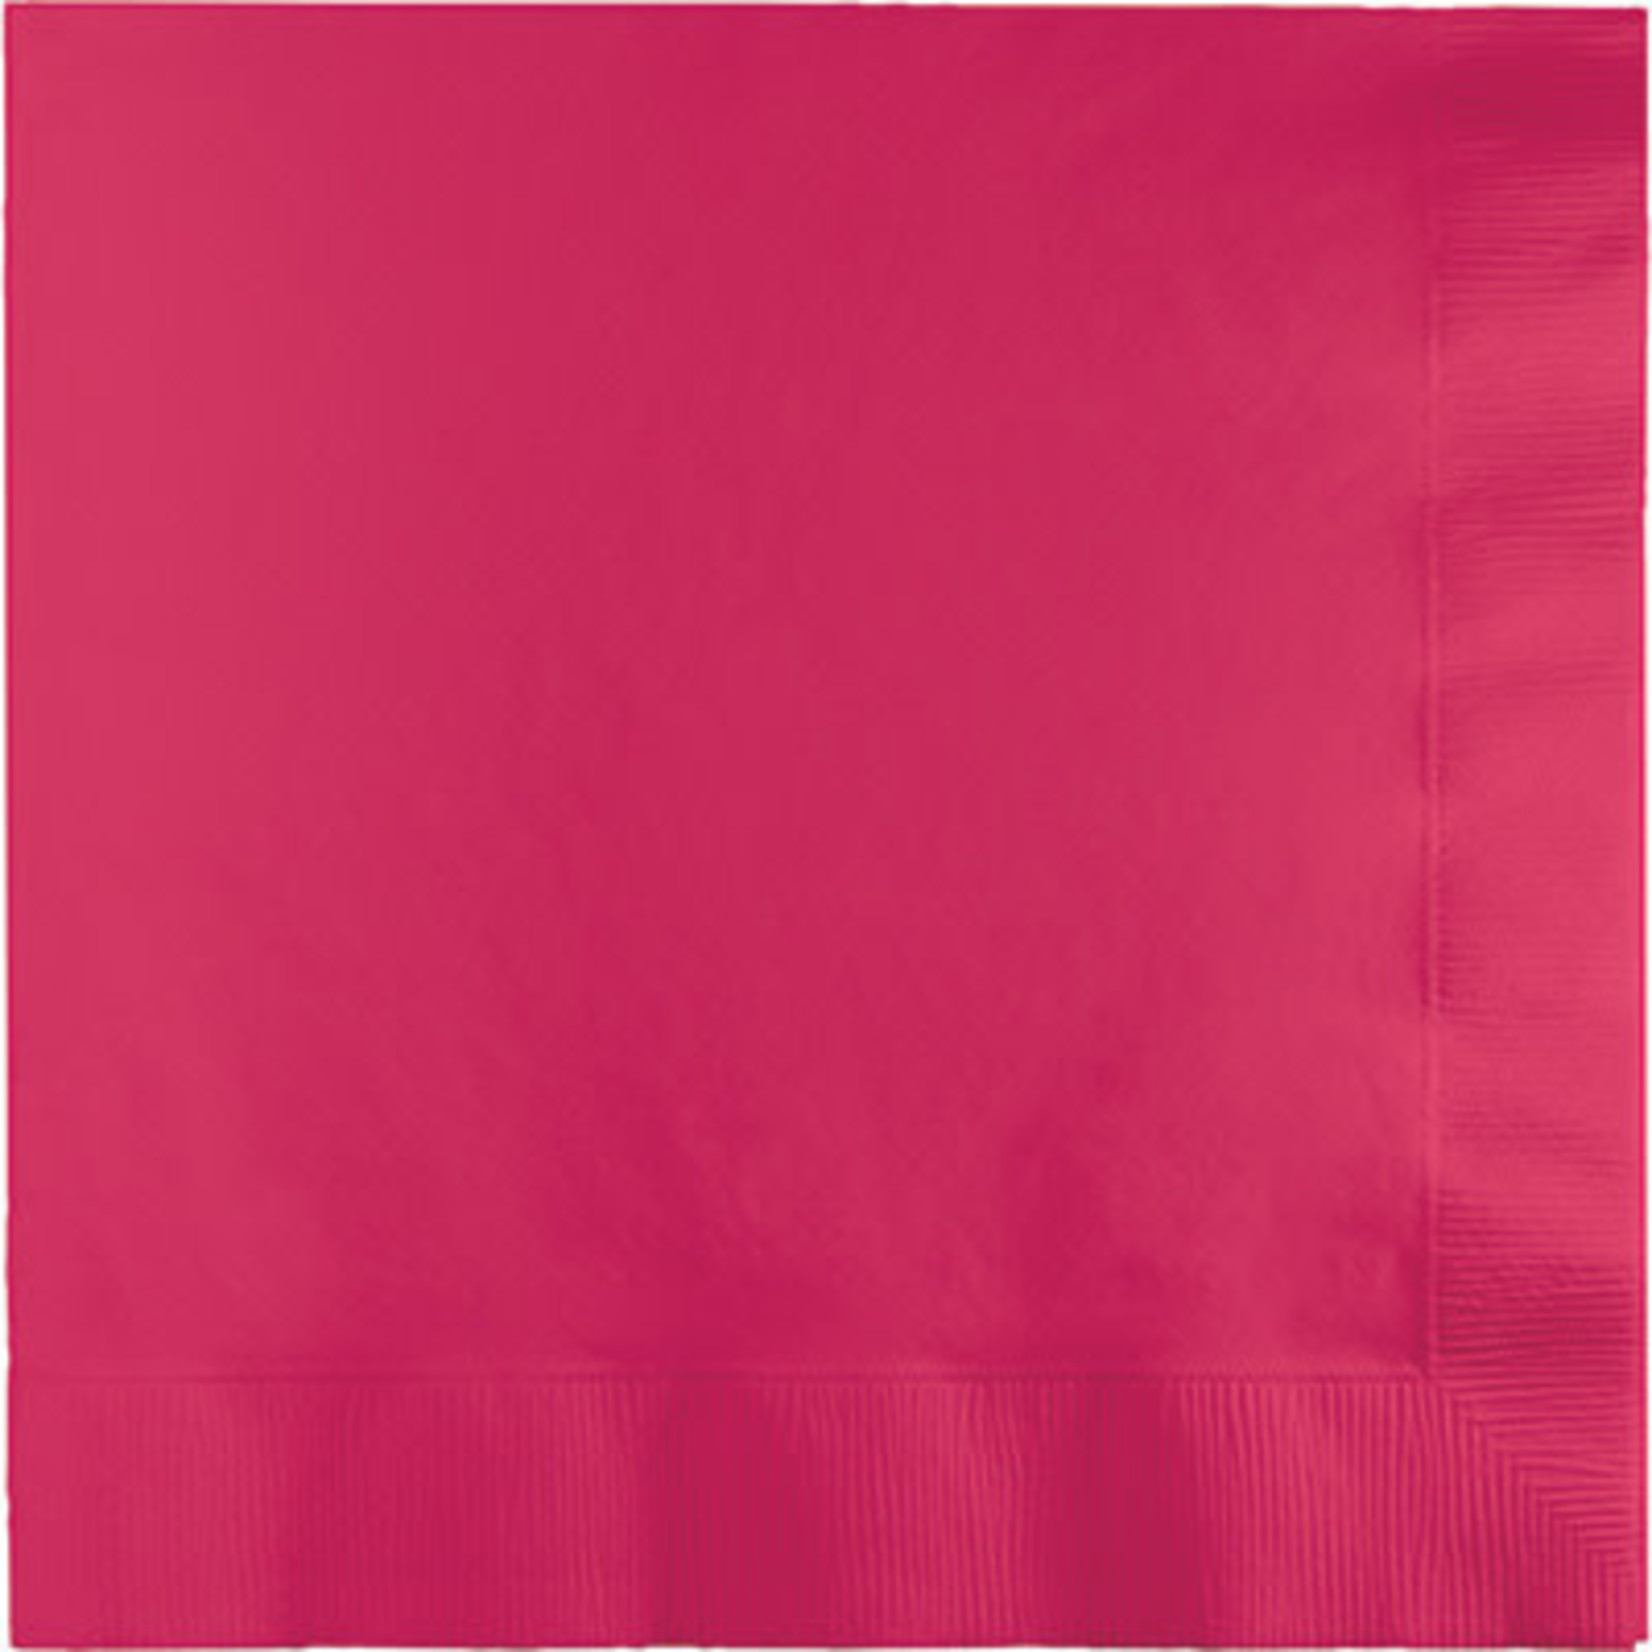 Touch of Color Magenta Pink 2-Ply Lunch Napkins - 50ct.